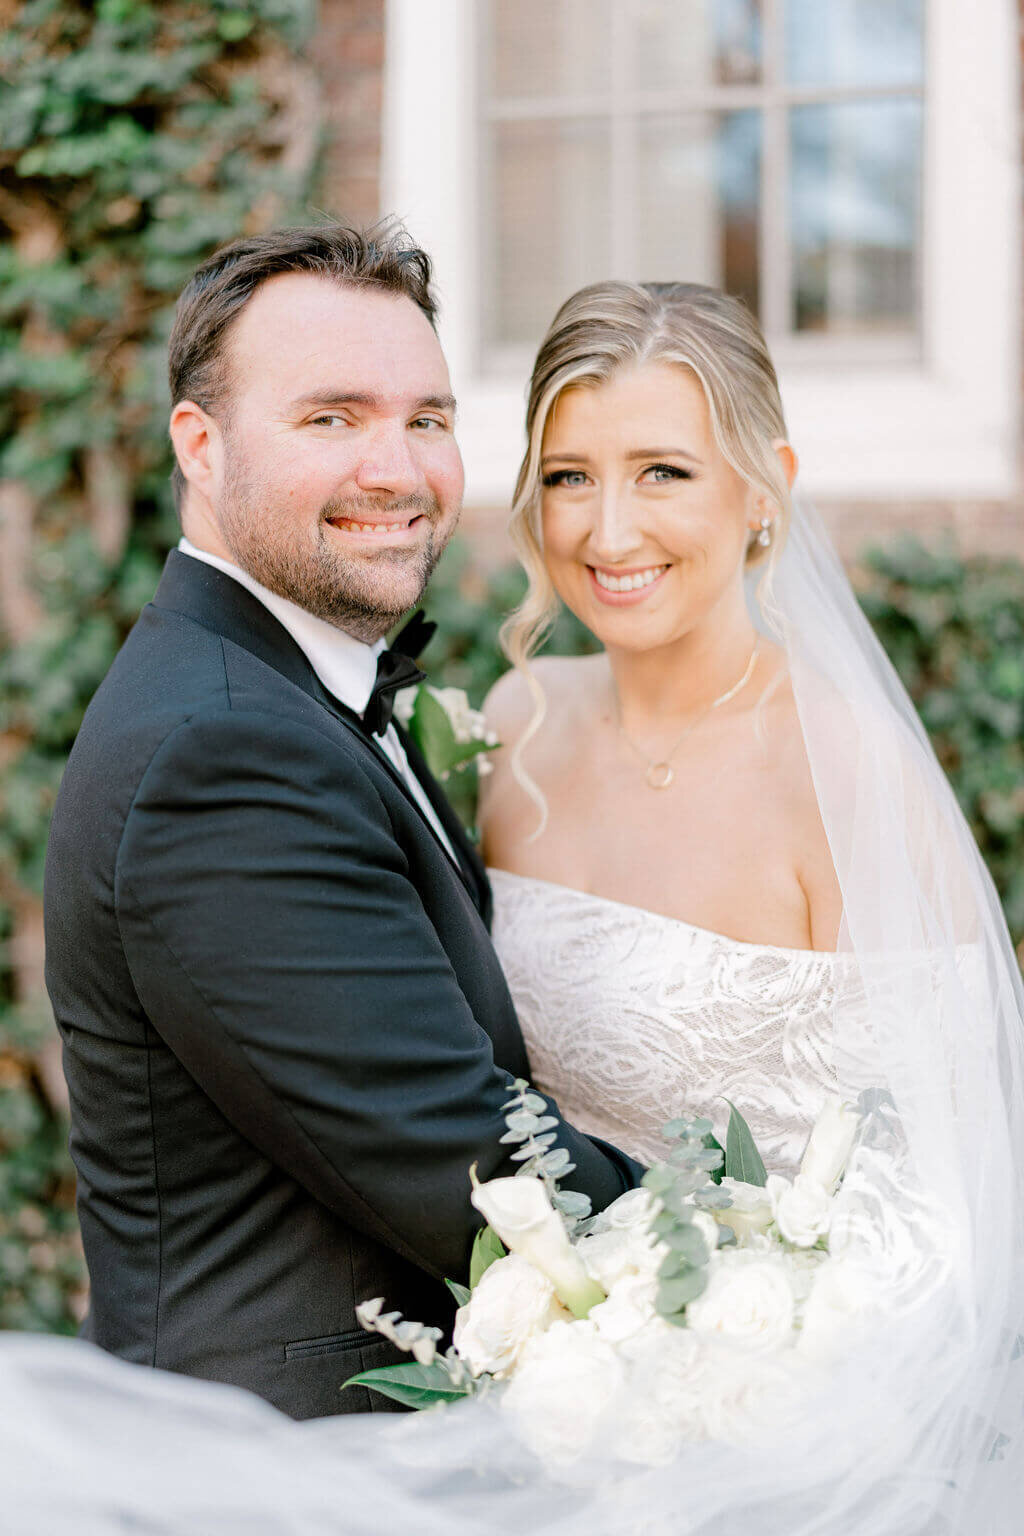 Close up portrait of bride and groom smiling at the camera captured by Rachael Mattio